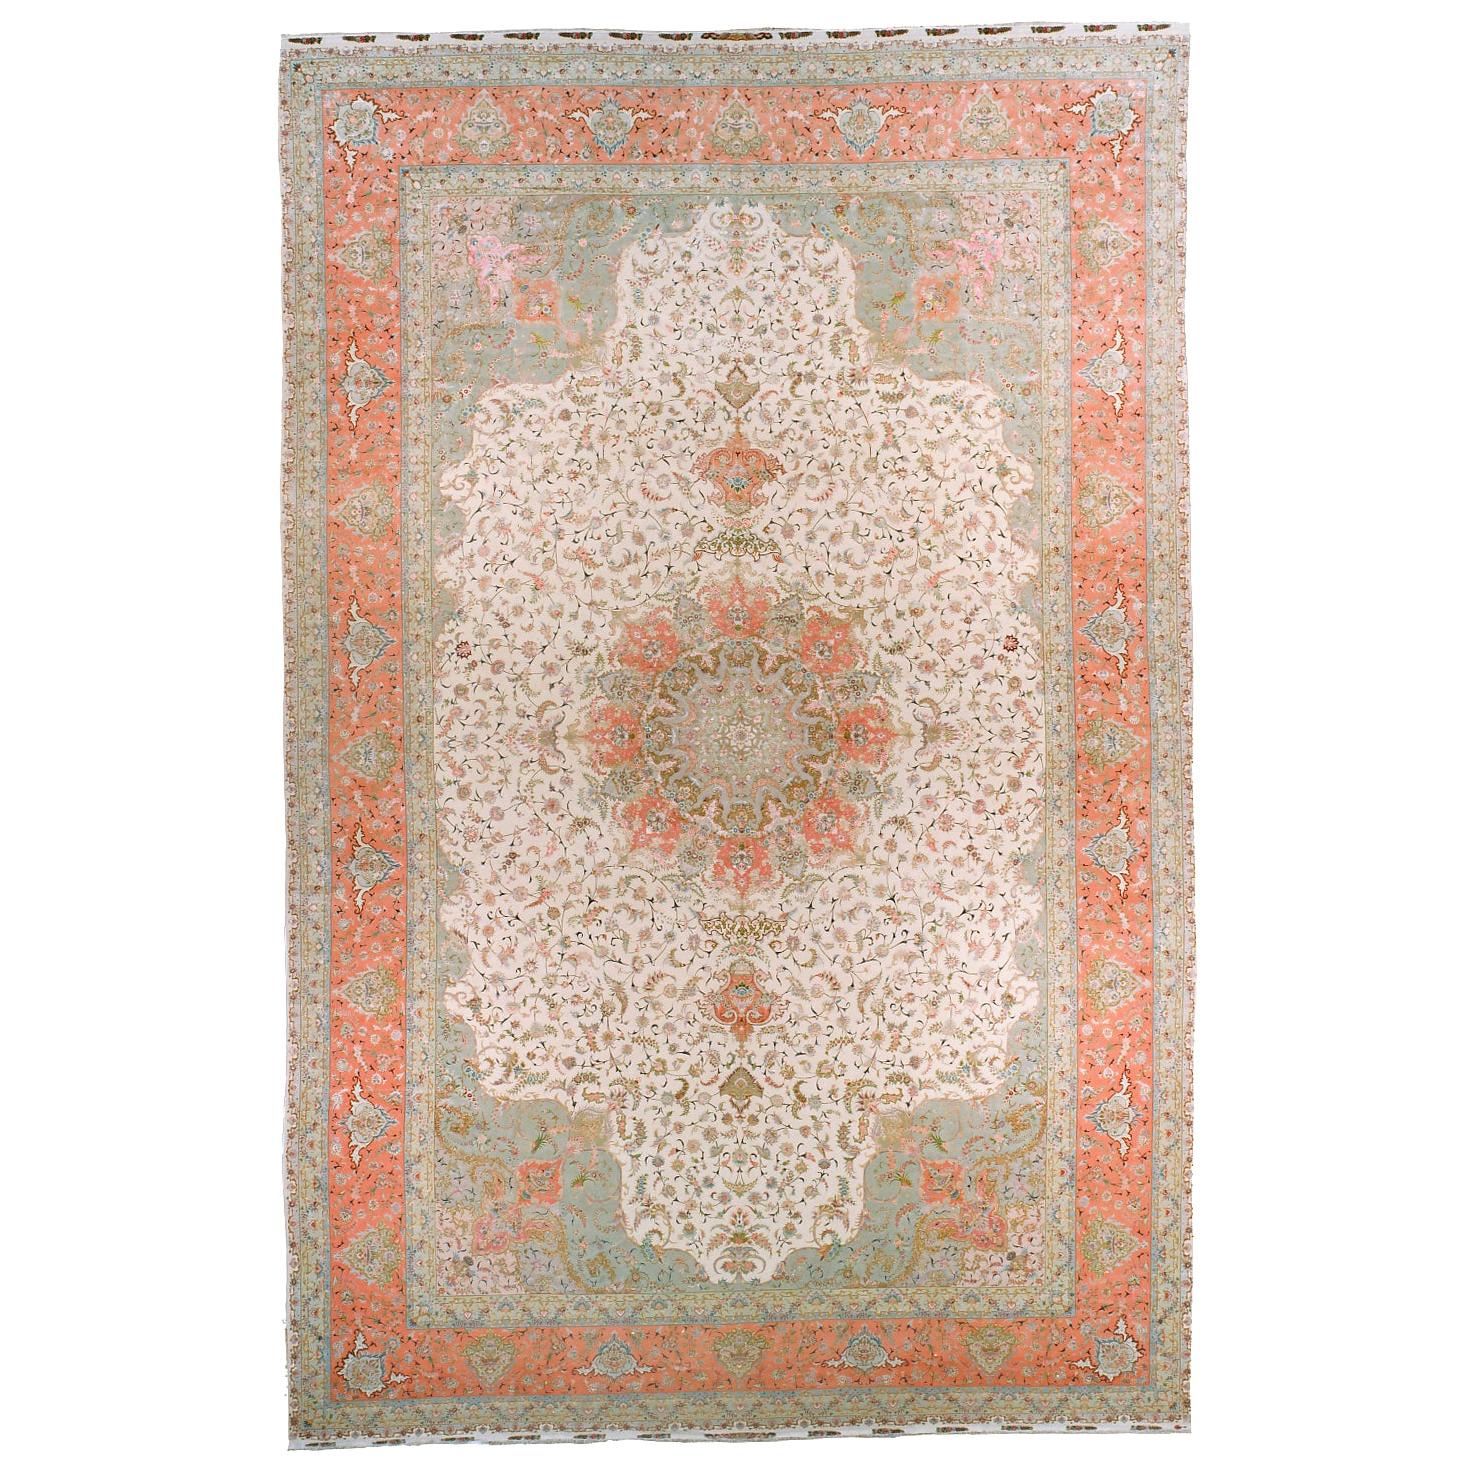 What is a Tabriz Persian rug?